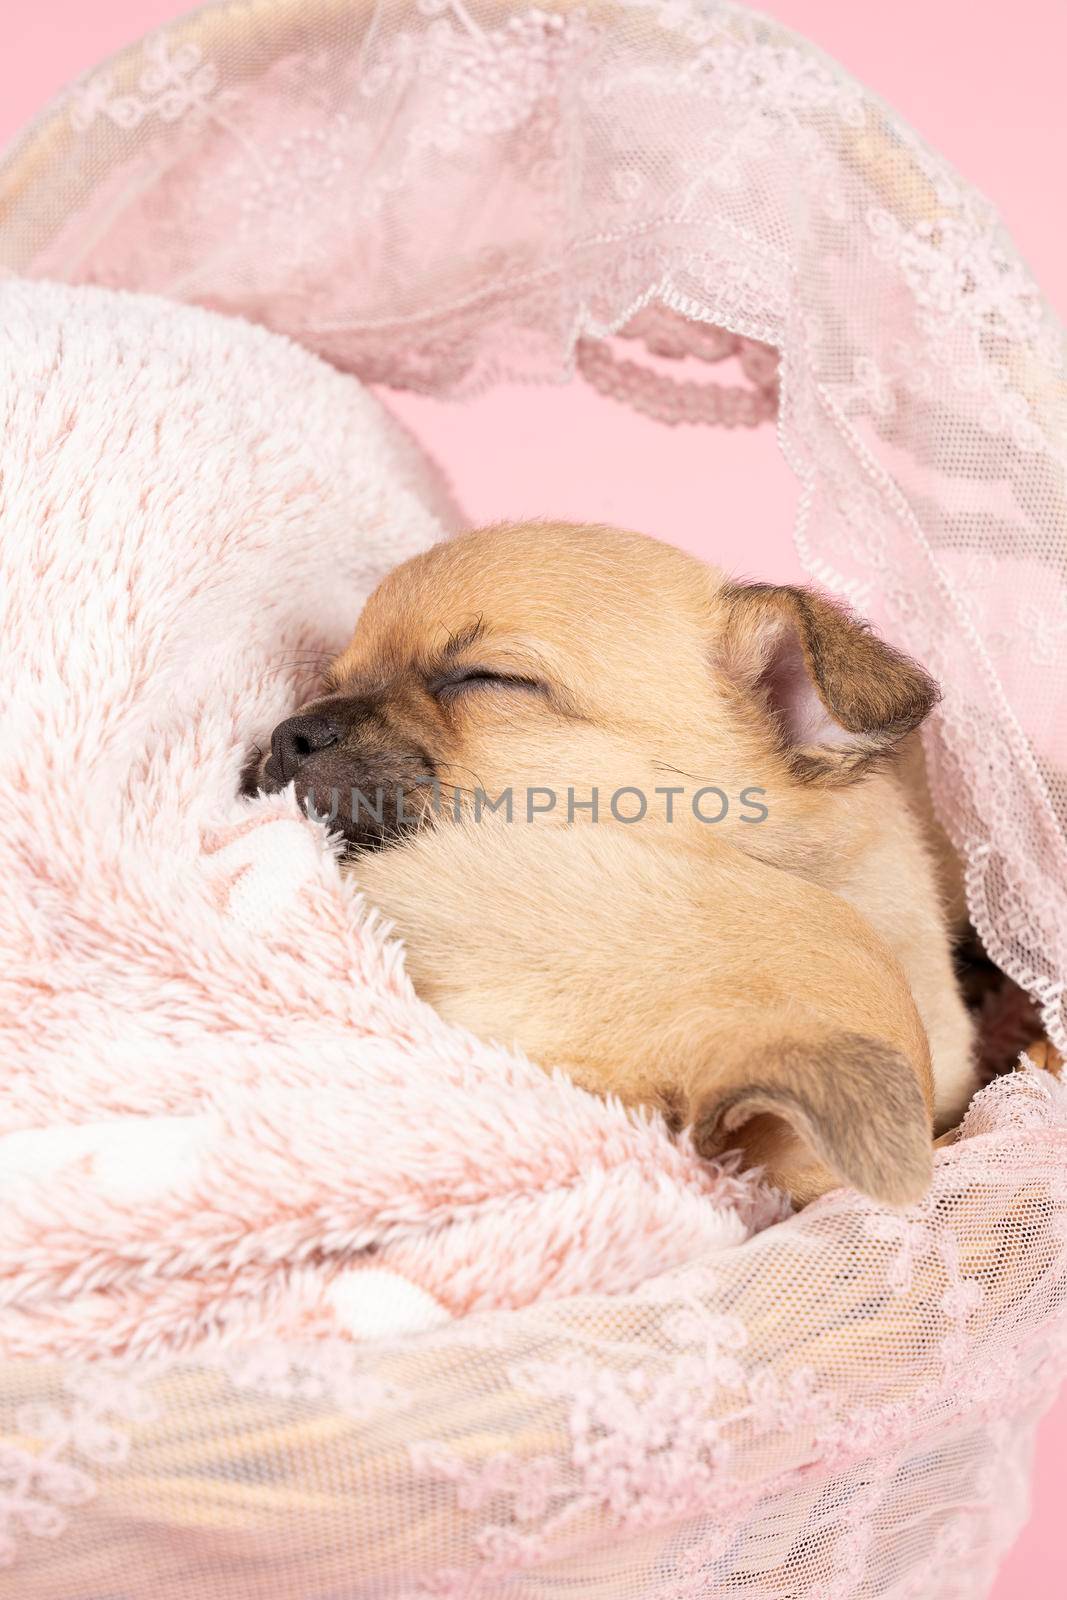 Two cute little Chihuahua puppies sleeping on a pink fur in a pink lace basket with a pink background by LeoniekvanderVliet